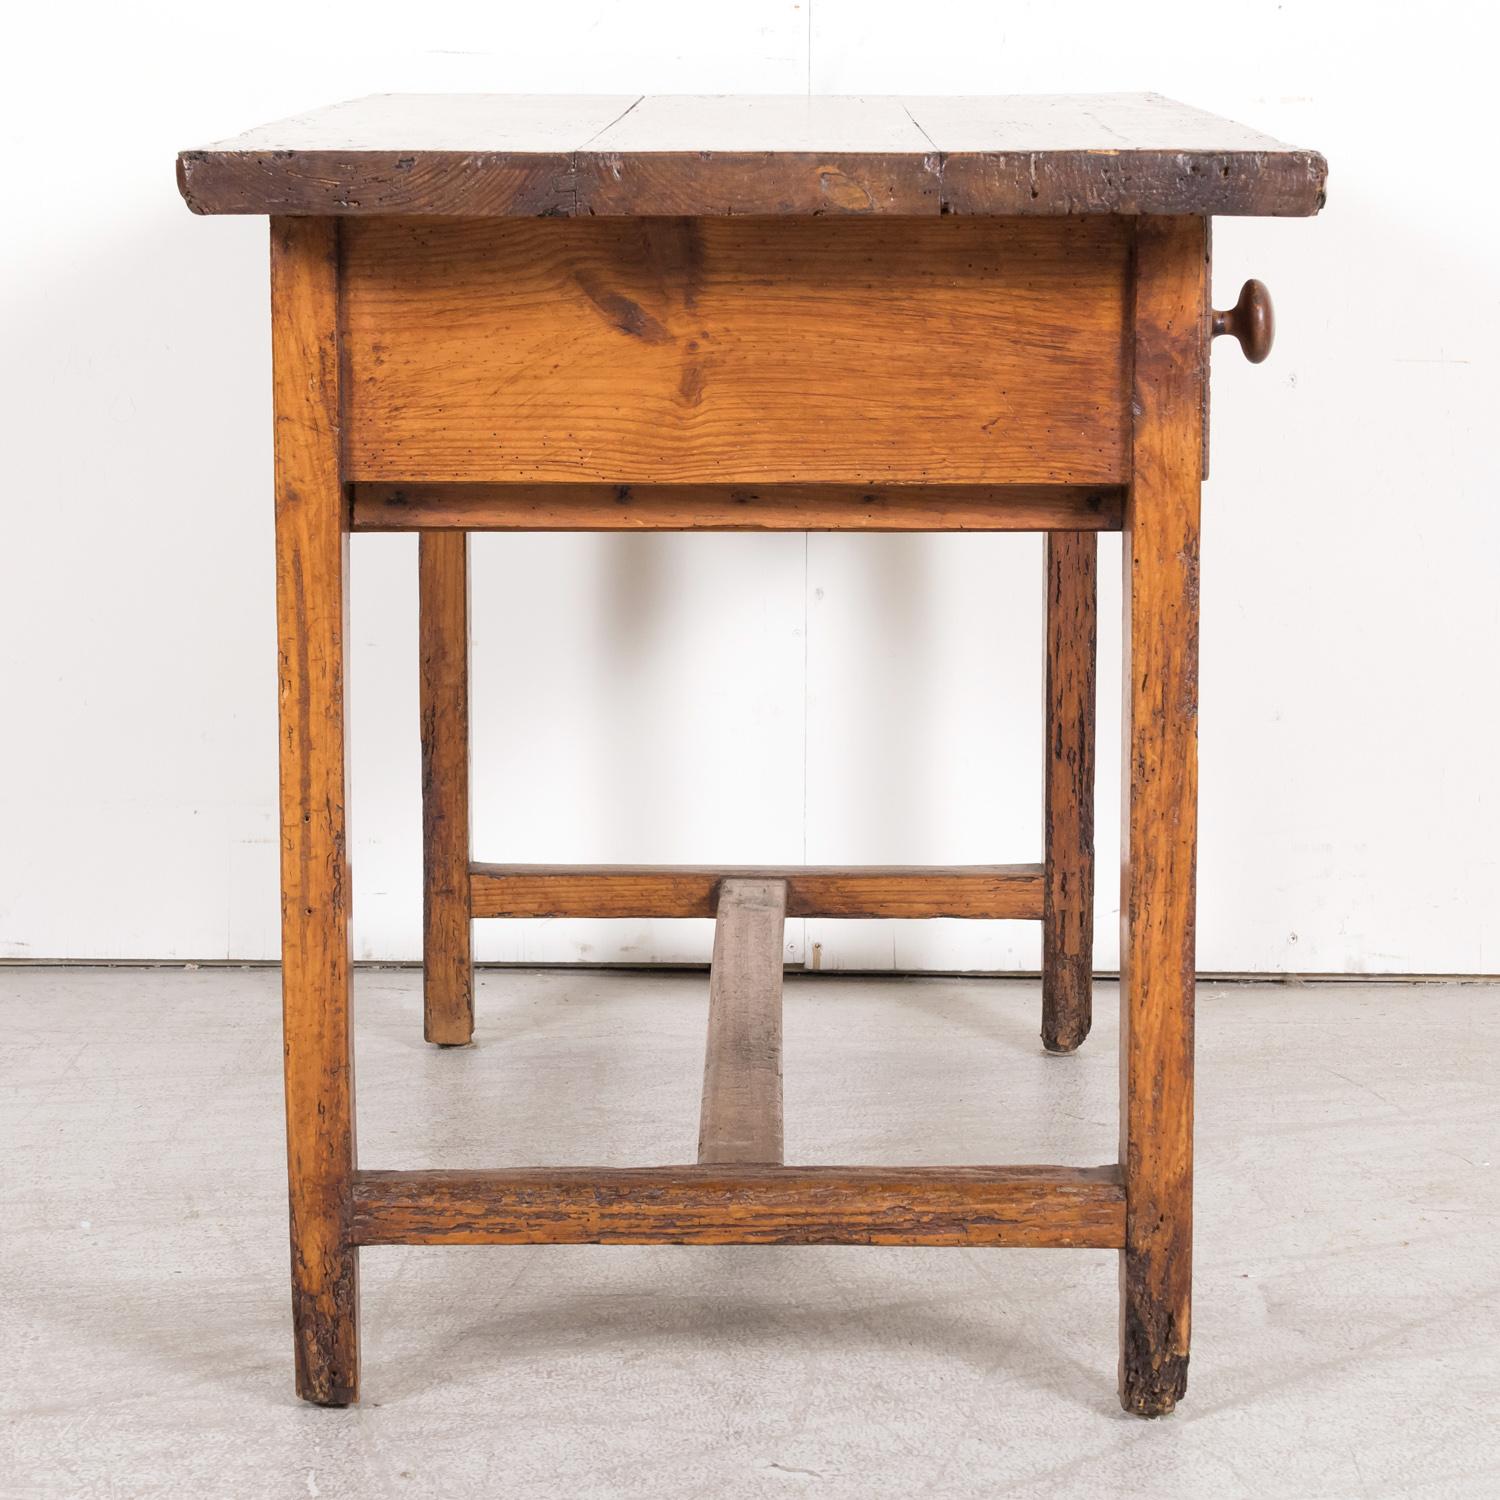 18th Century French Provincial Primitive Larch Wood Side Table or Desk with Draw For Sale 13